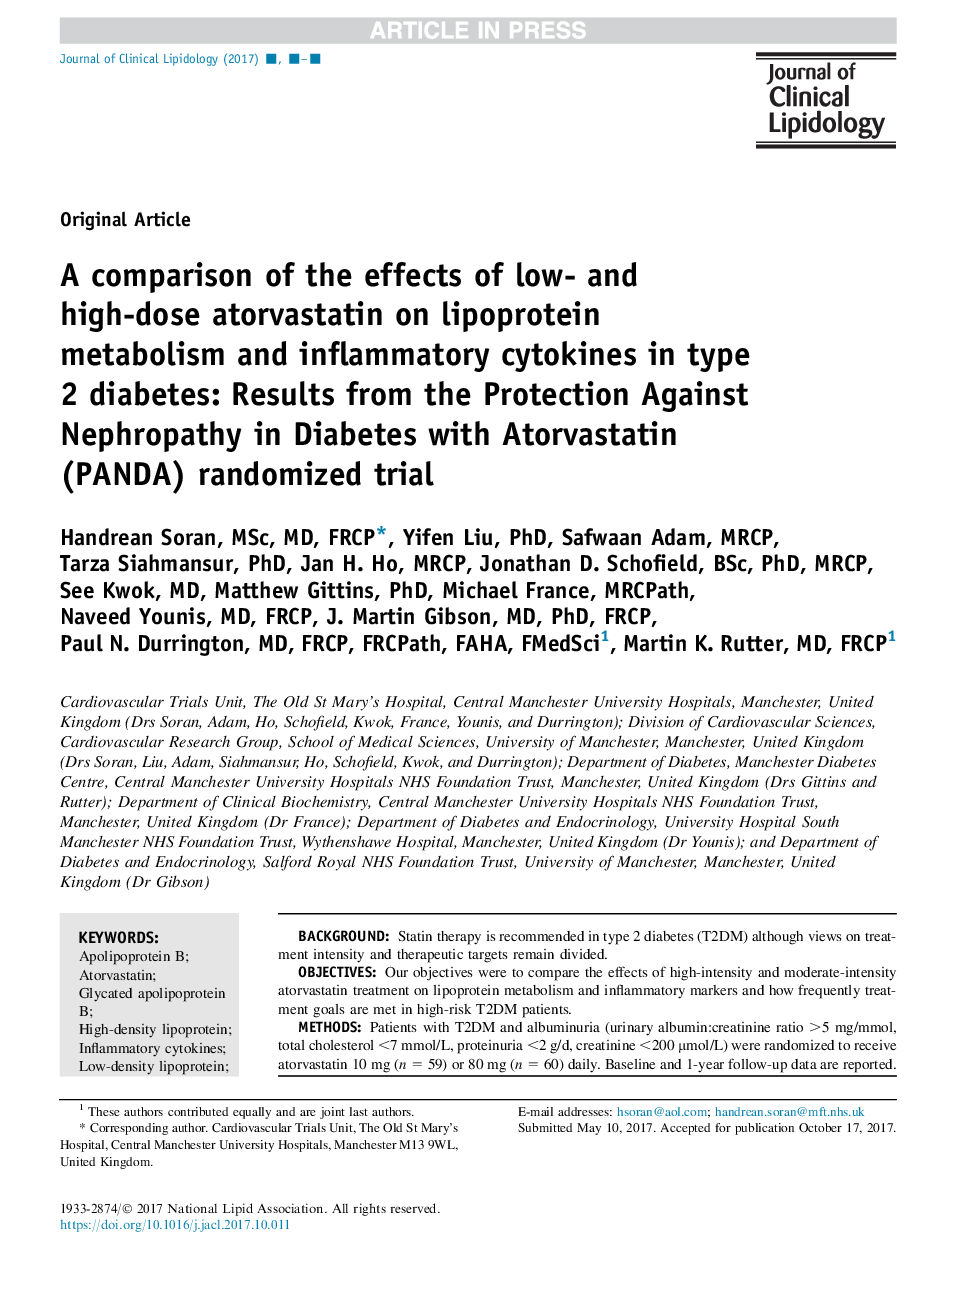 A comparison of the effects of low- and high-dose atorvastatin on lipoprotein metabolism and inflammatory cytokines in type 2 diabetes: Results from the Protection Against Nephropathy in Diabetes with Atorvastatin (PANDA) randomized trial